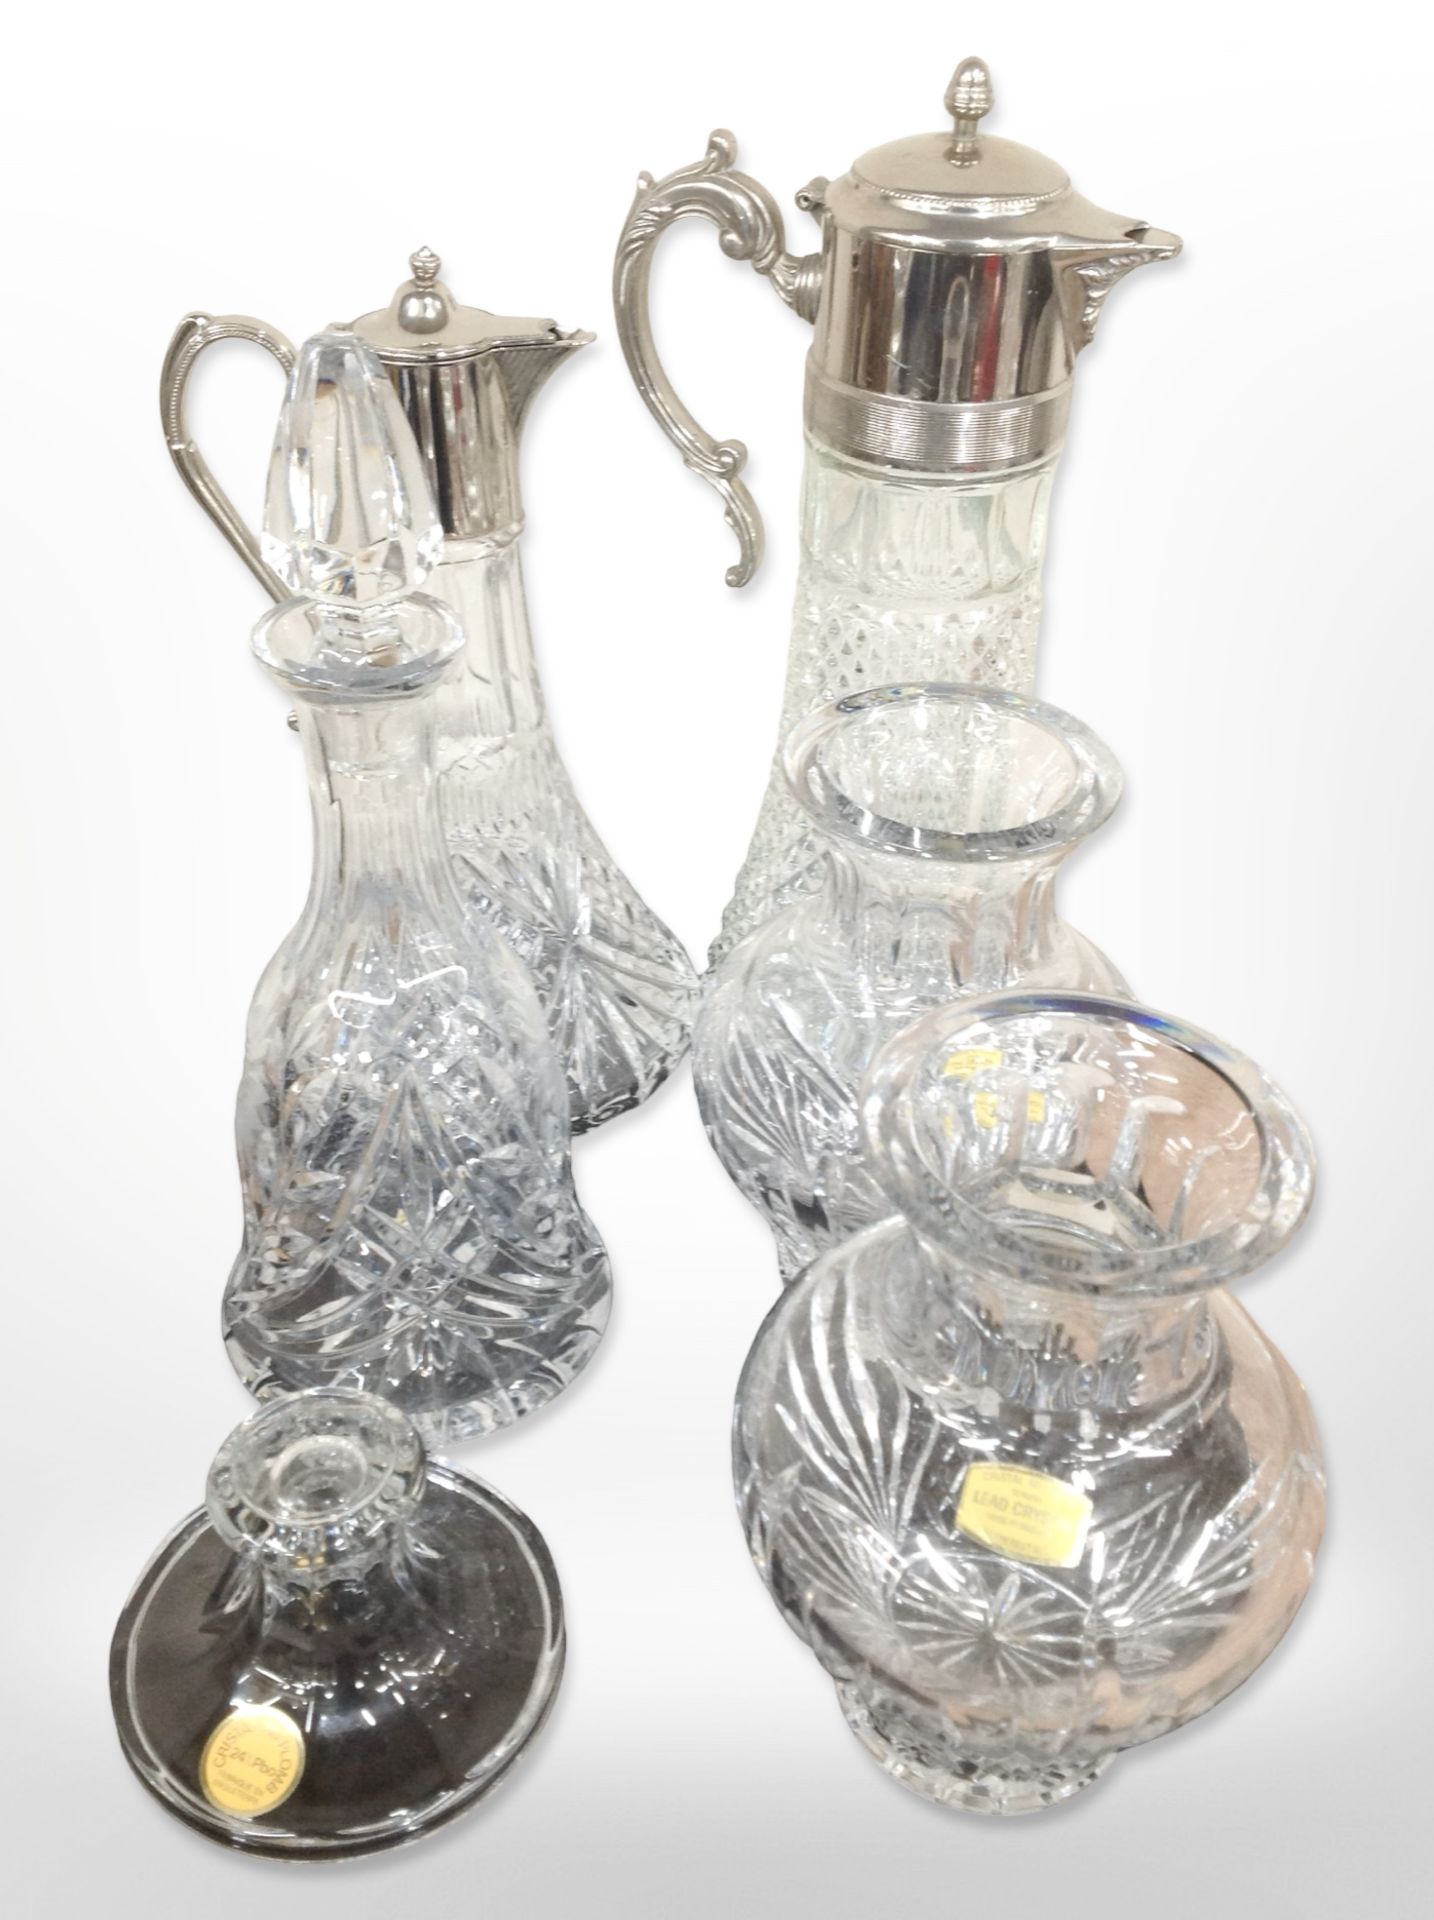 Two claret jugs with silver-plated lids, together with four pieces of lead crystal.